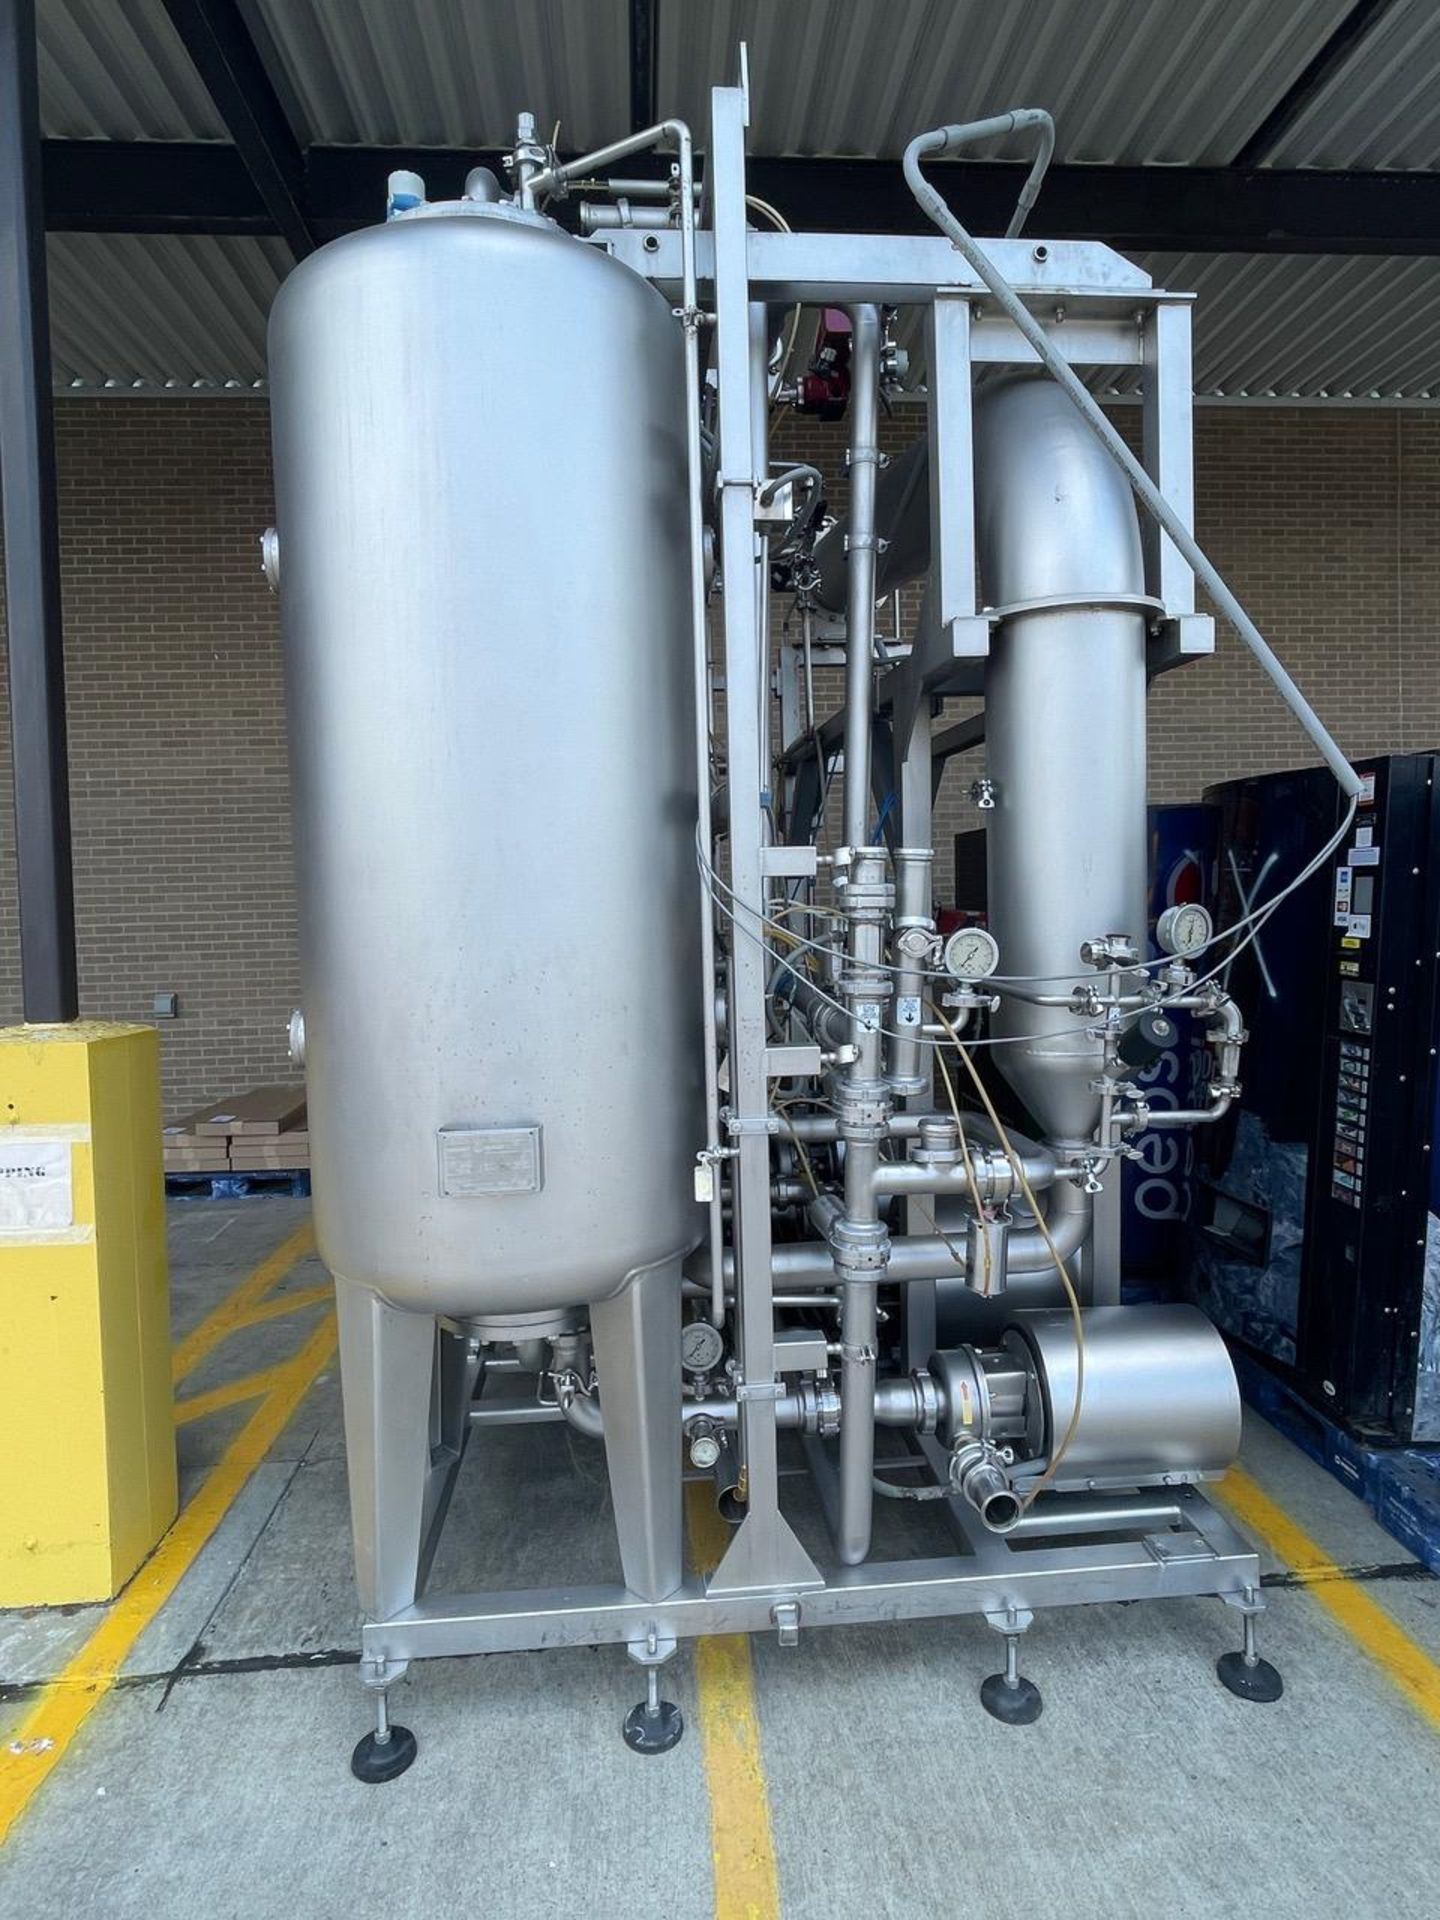 Sidel Alsim High Speed Continuous Soft-drink Blending System (PARTS MACHINE) - Model MAS MIX 30000L - Image 3 of 5